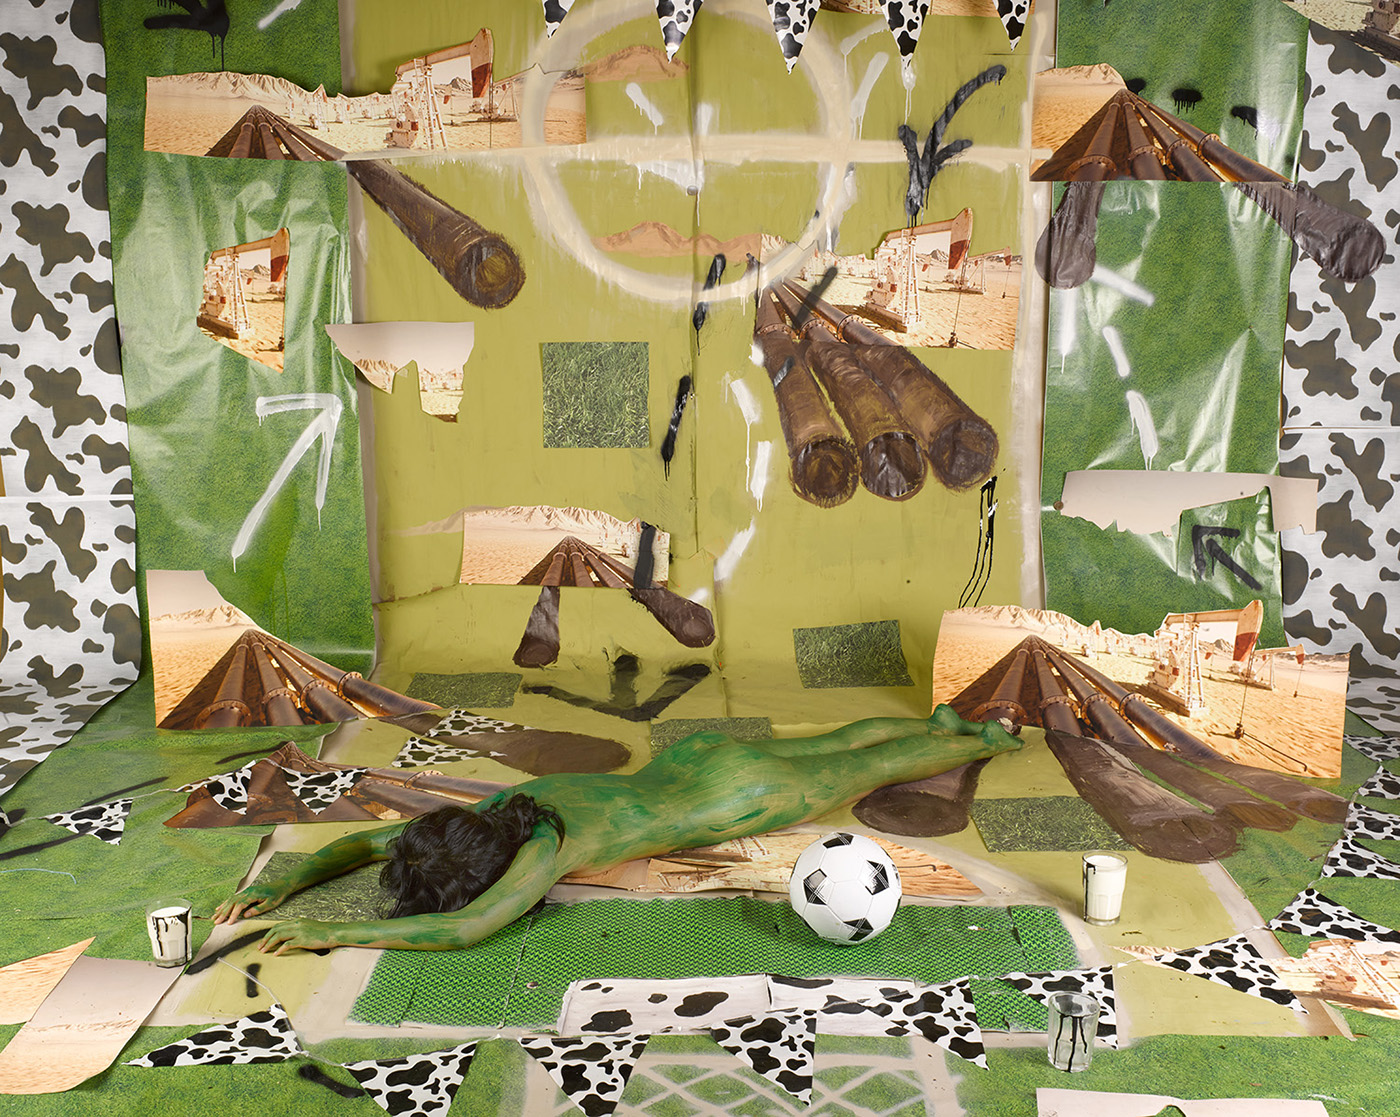 Collage; a nude figure painted green laying on a scene with oil pipelines, a football field, and a jersey cow pattern.